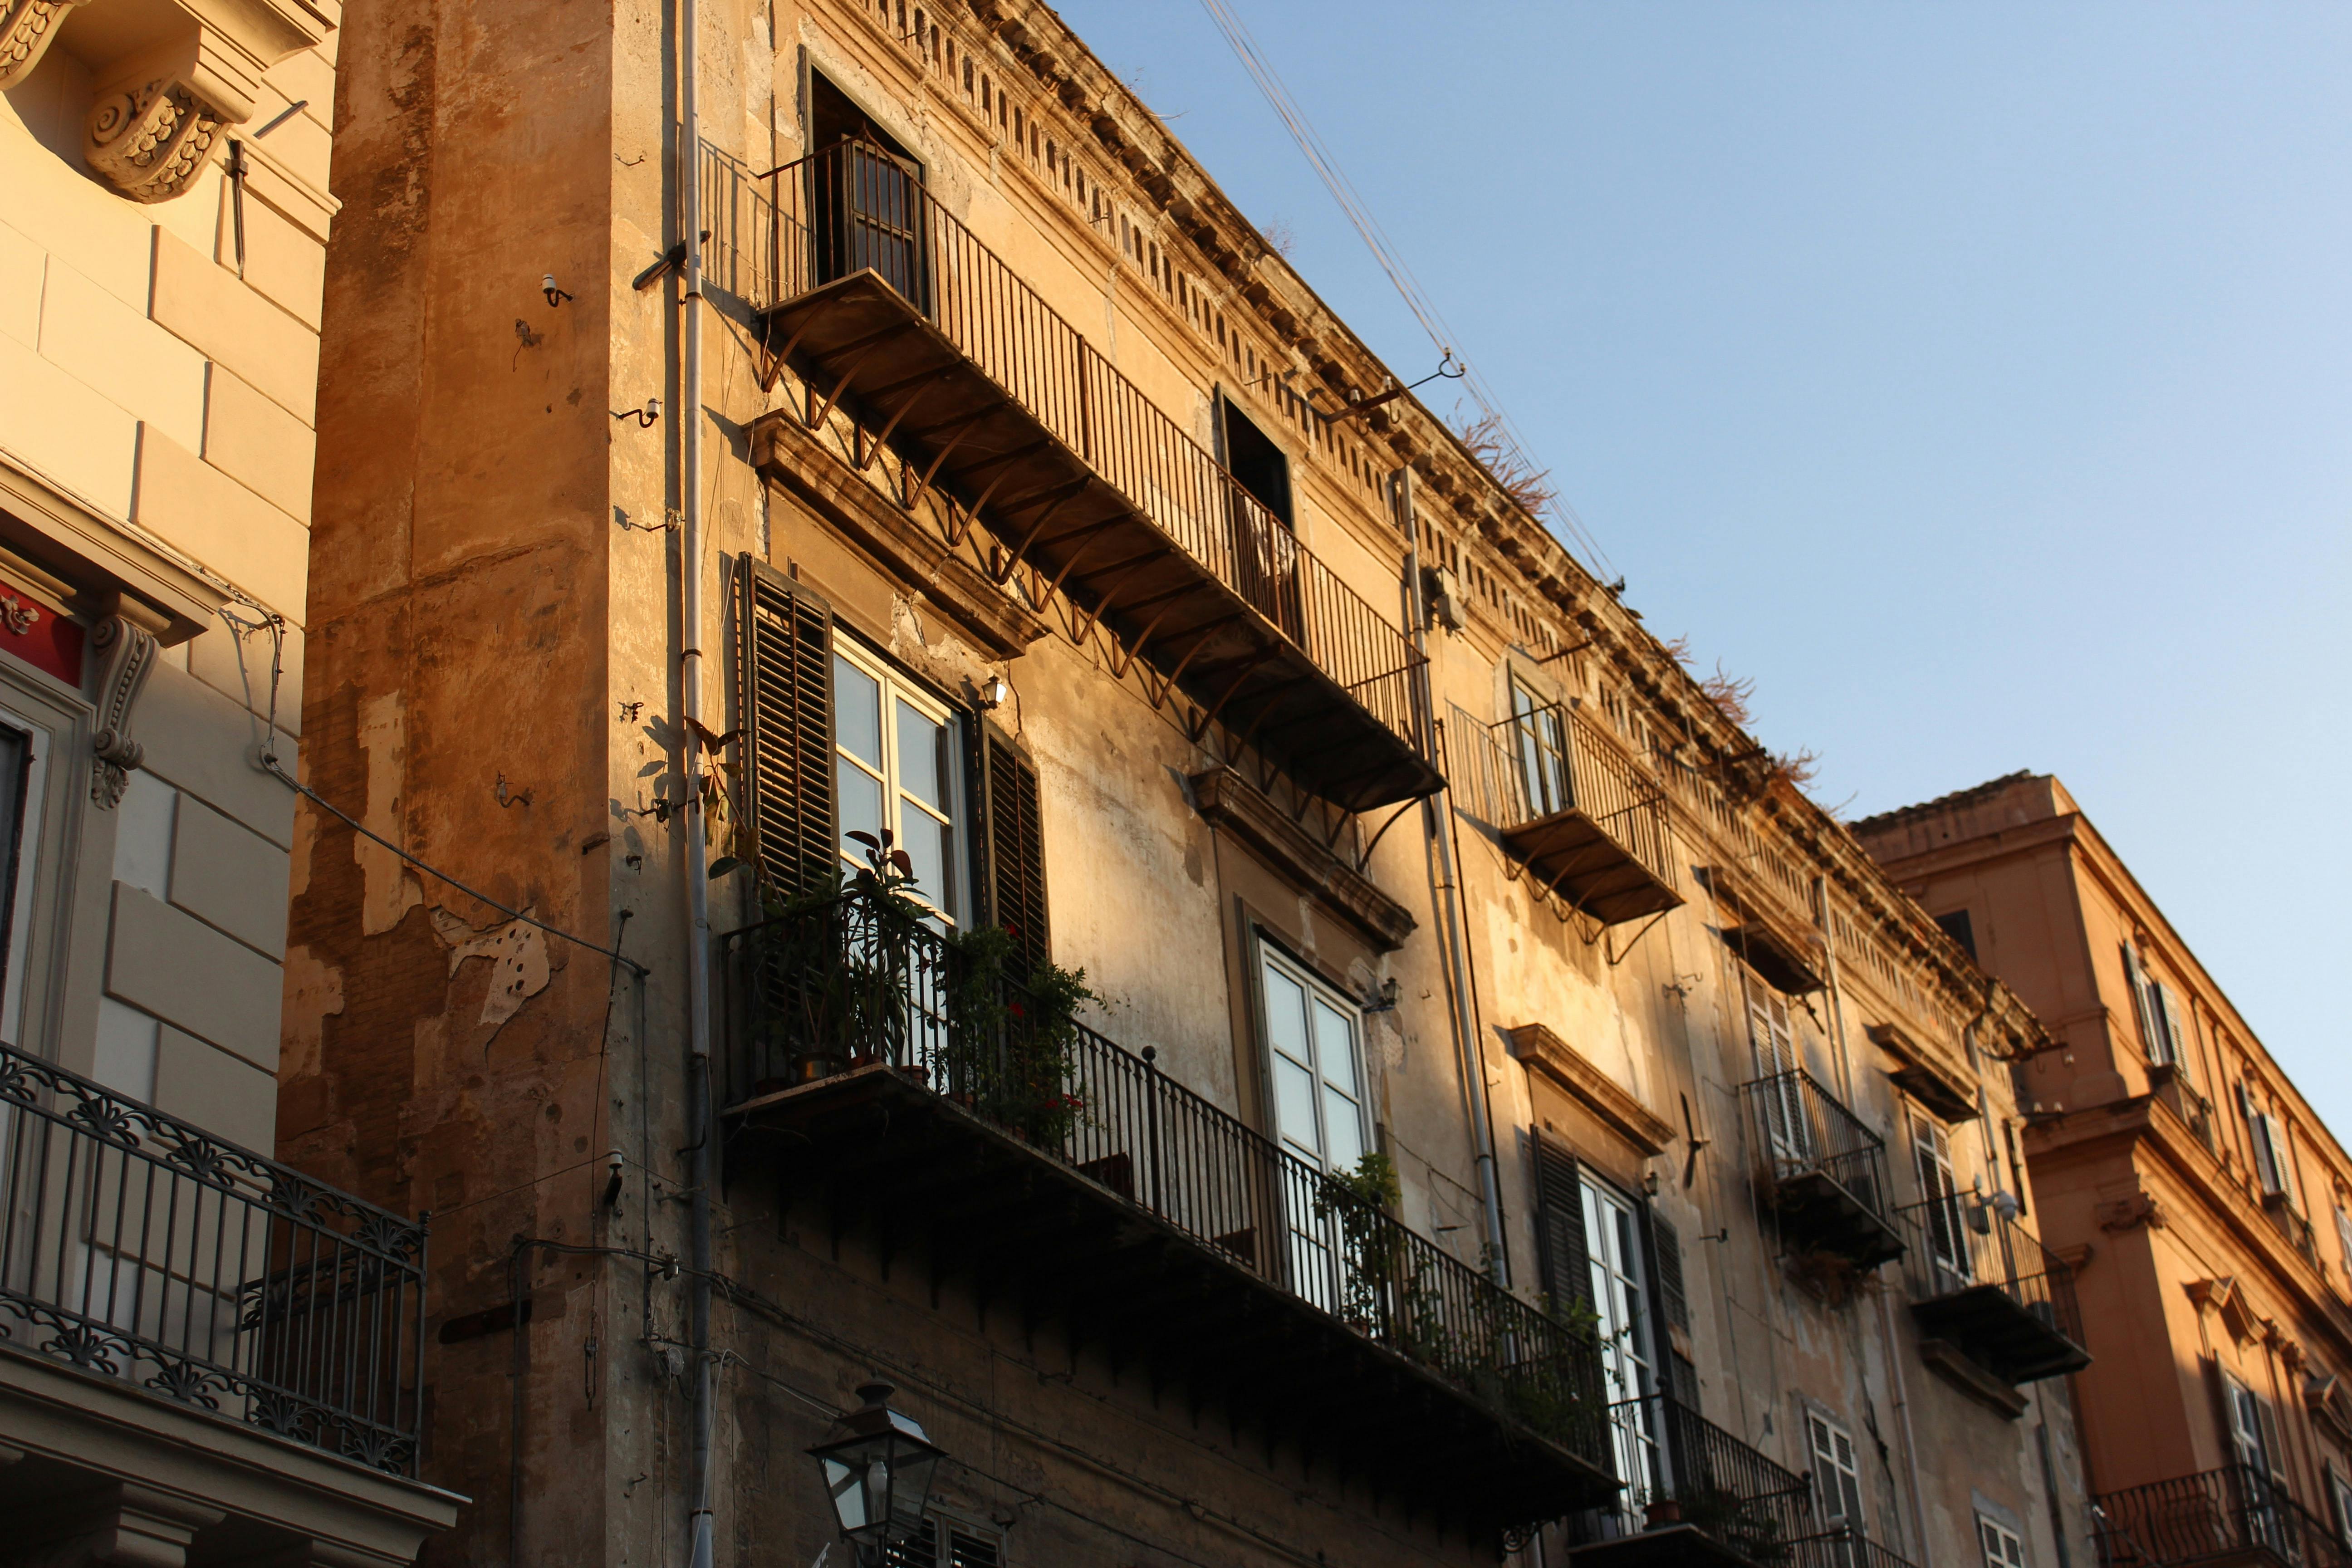 Apartment building in Palermo